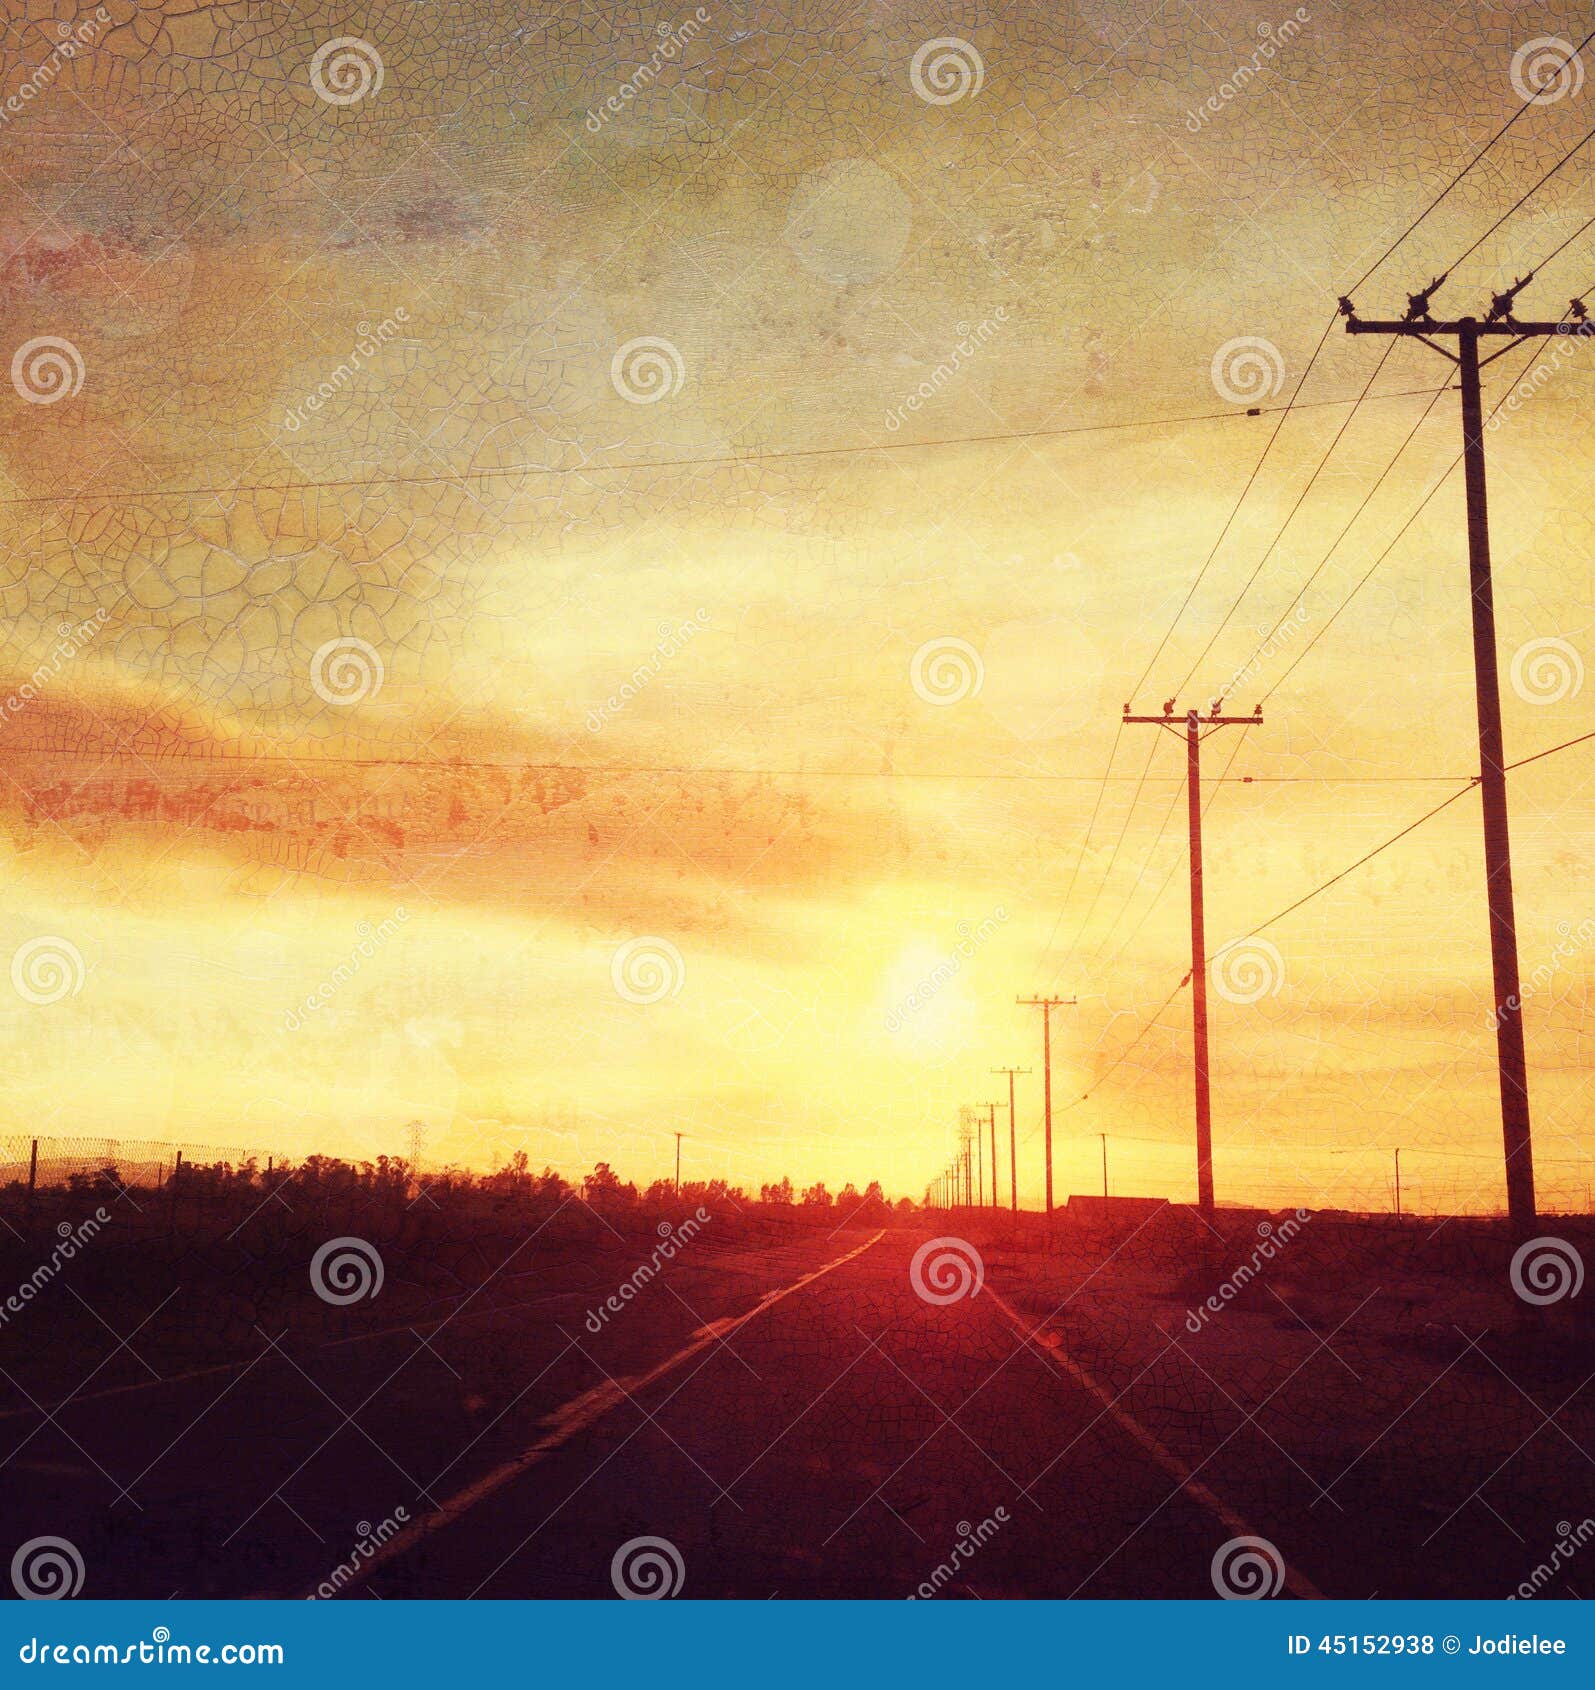 sunset over road with telegraph poles country scene